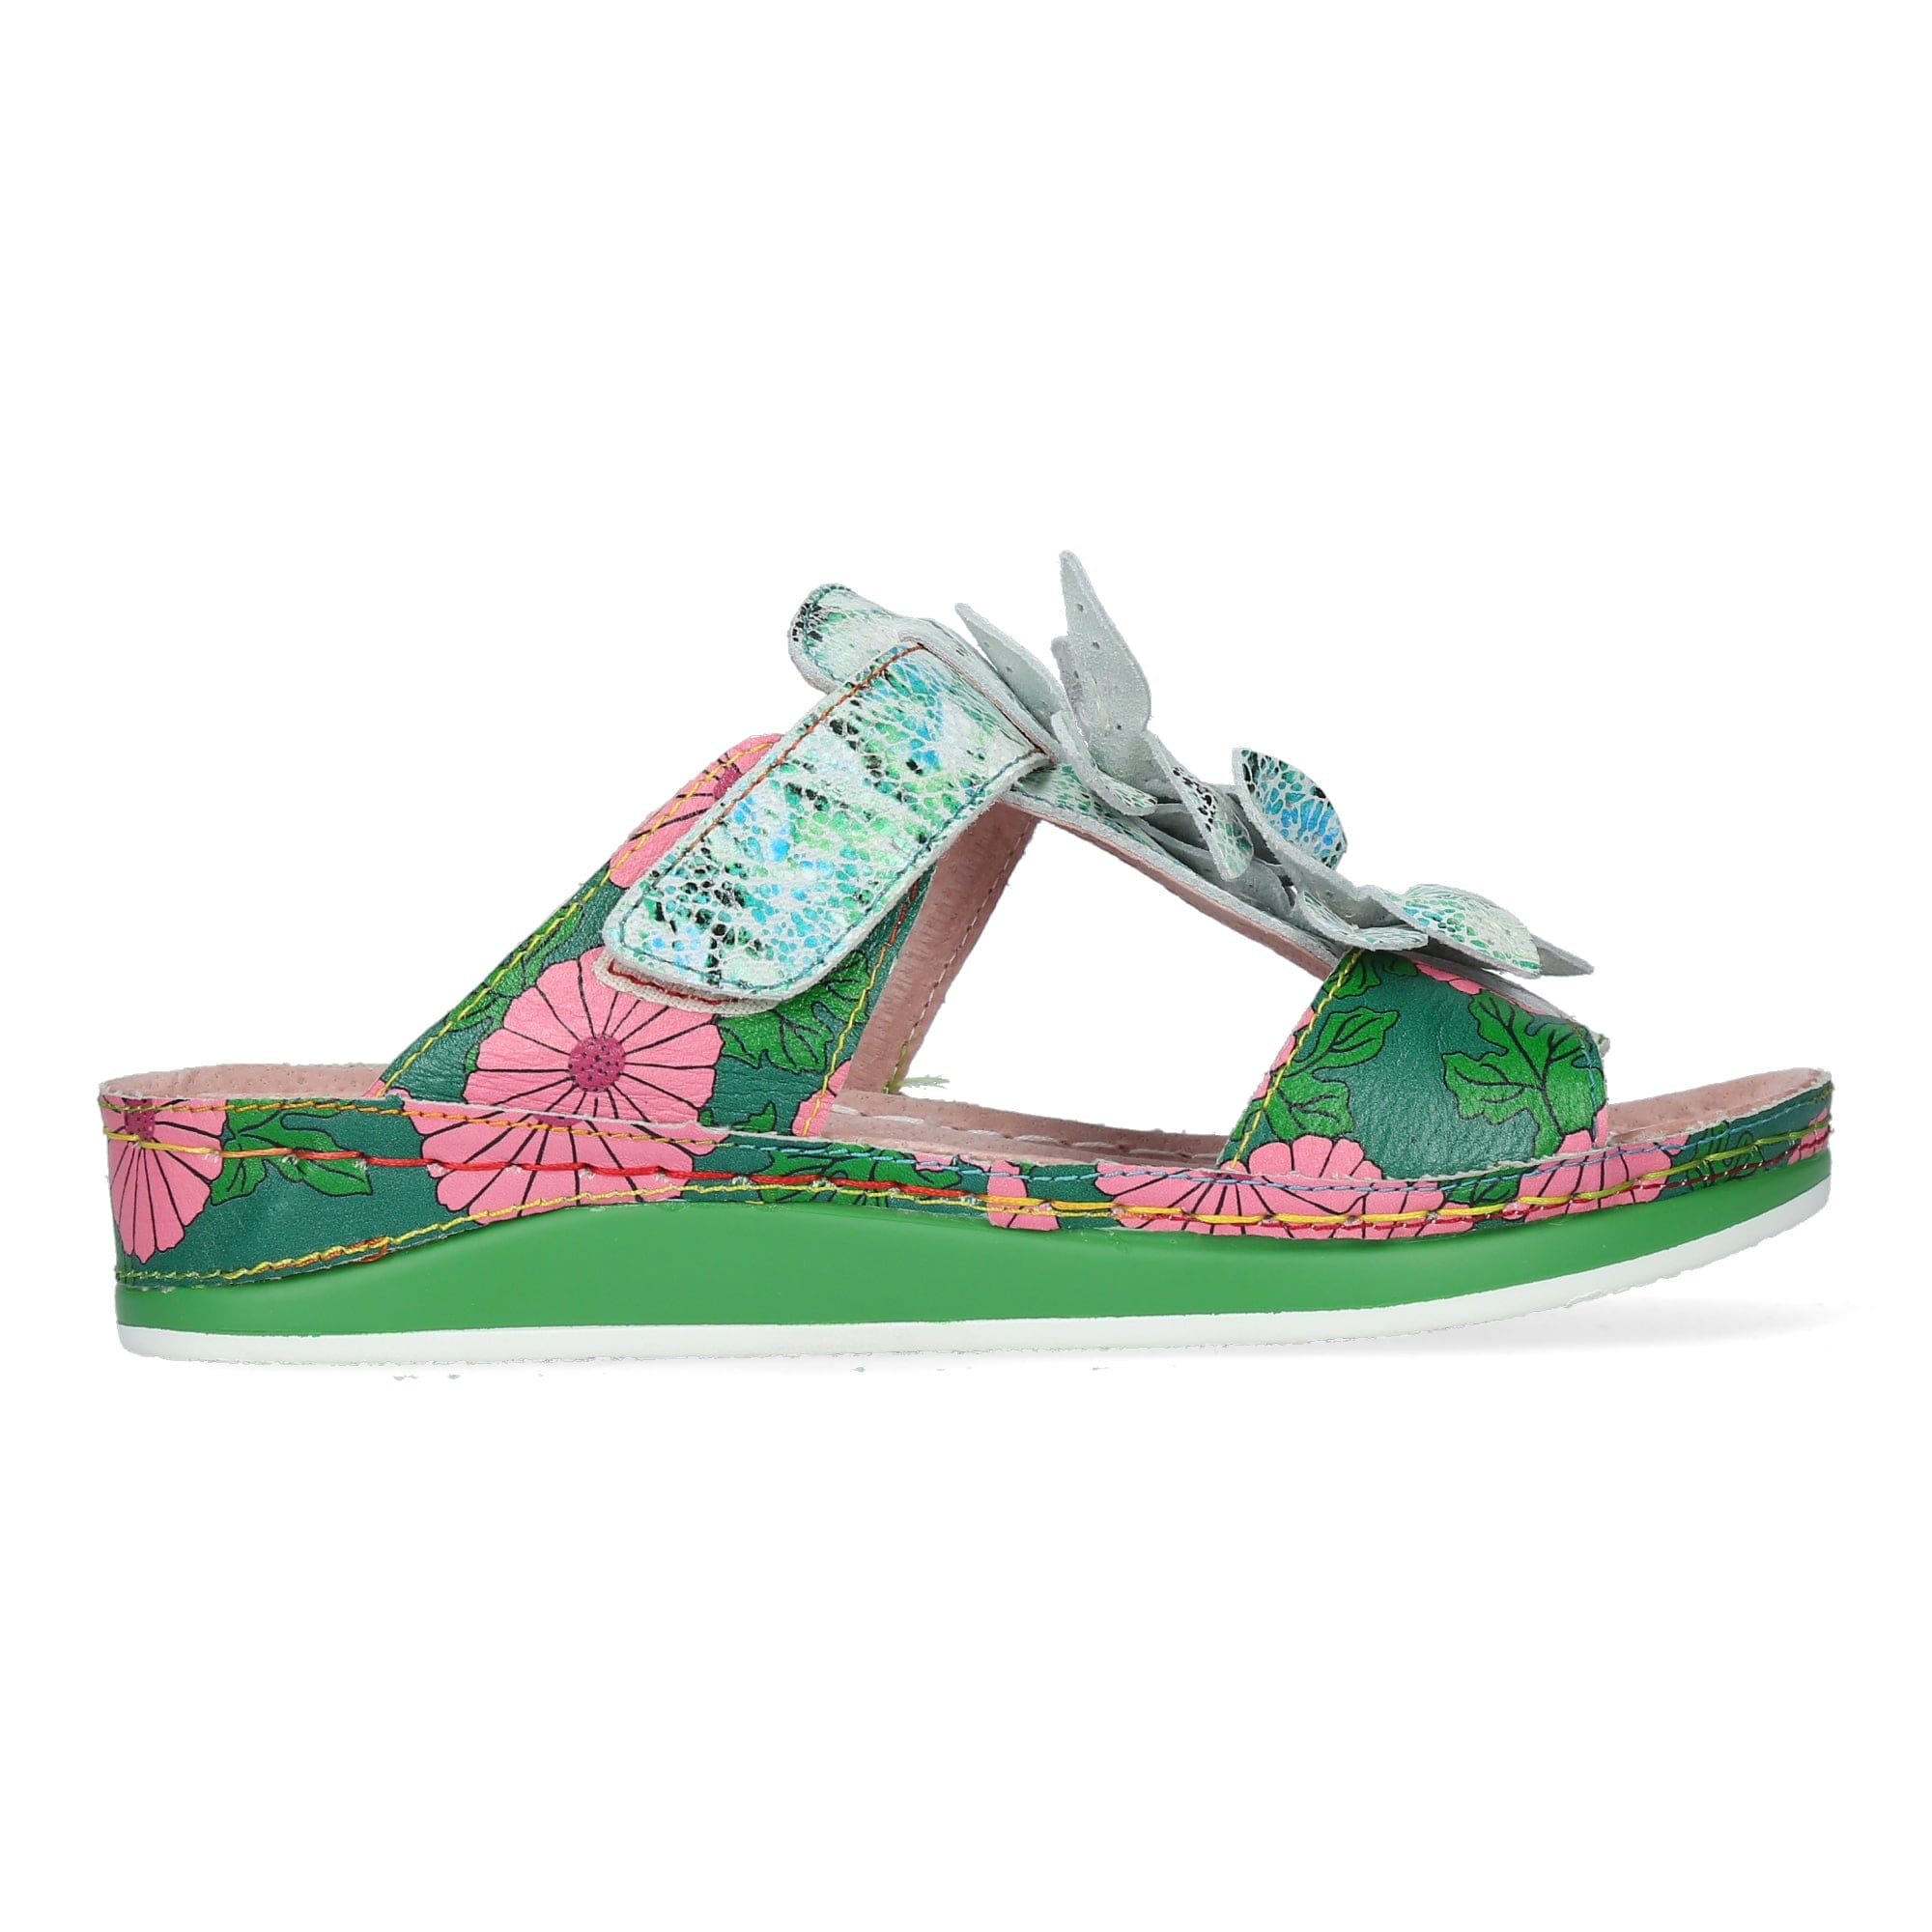 Chaussures BRCUELO 8321 - 35 / Menthe - Mule